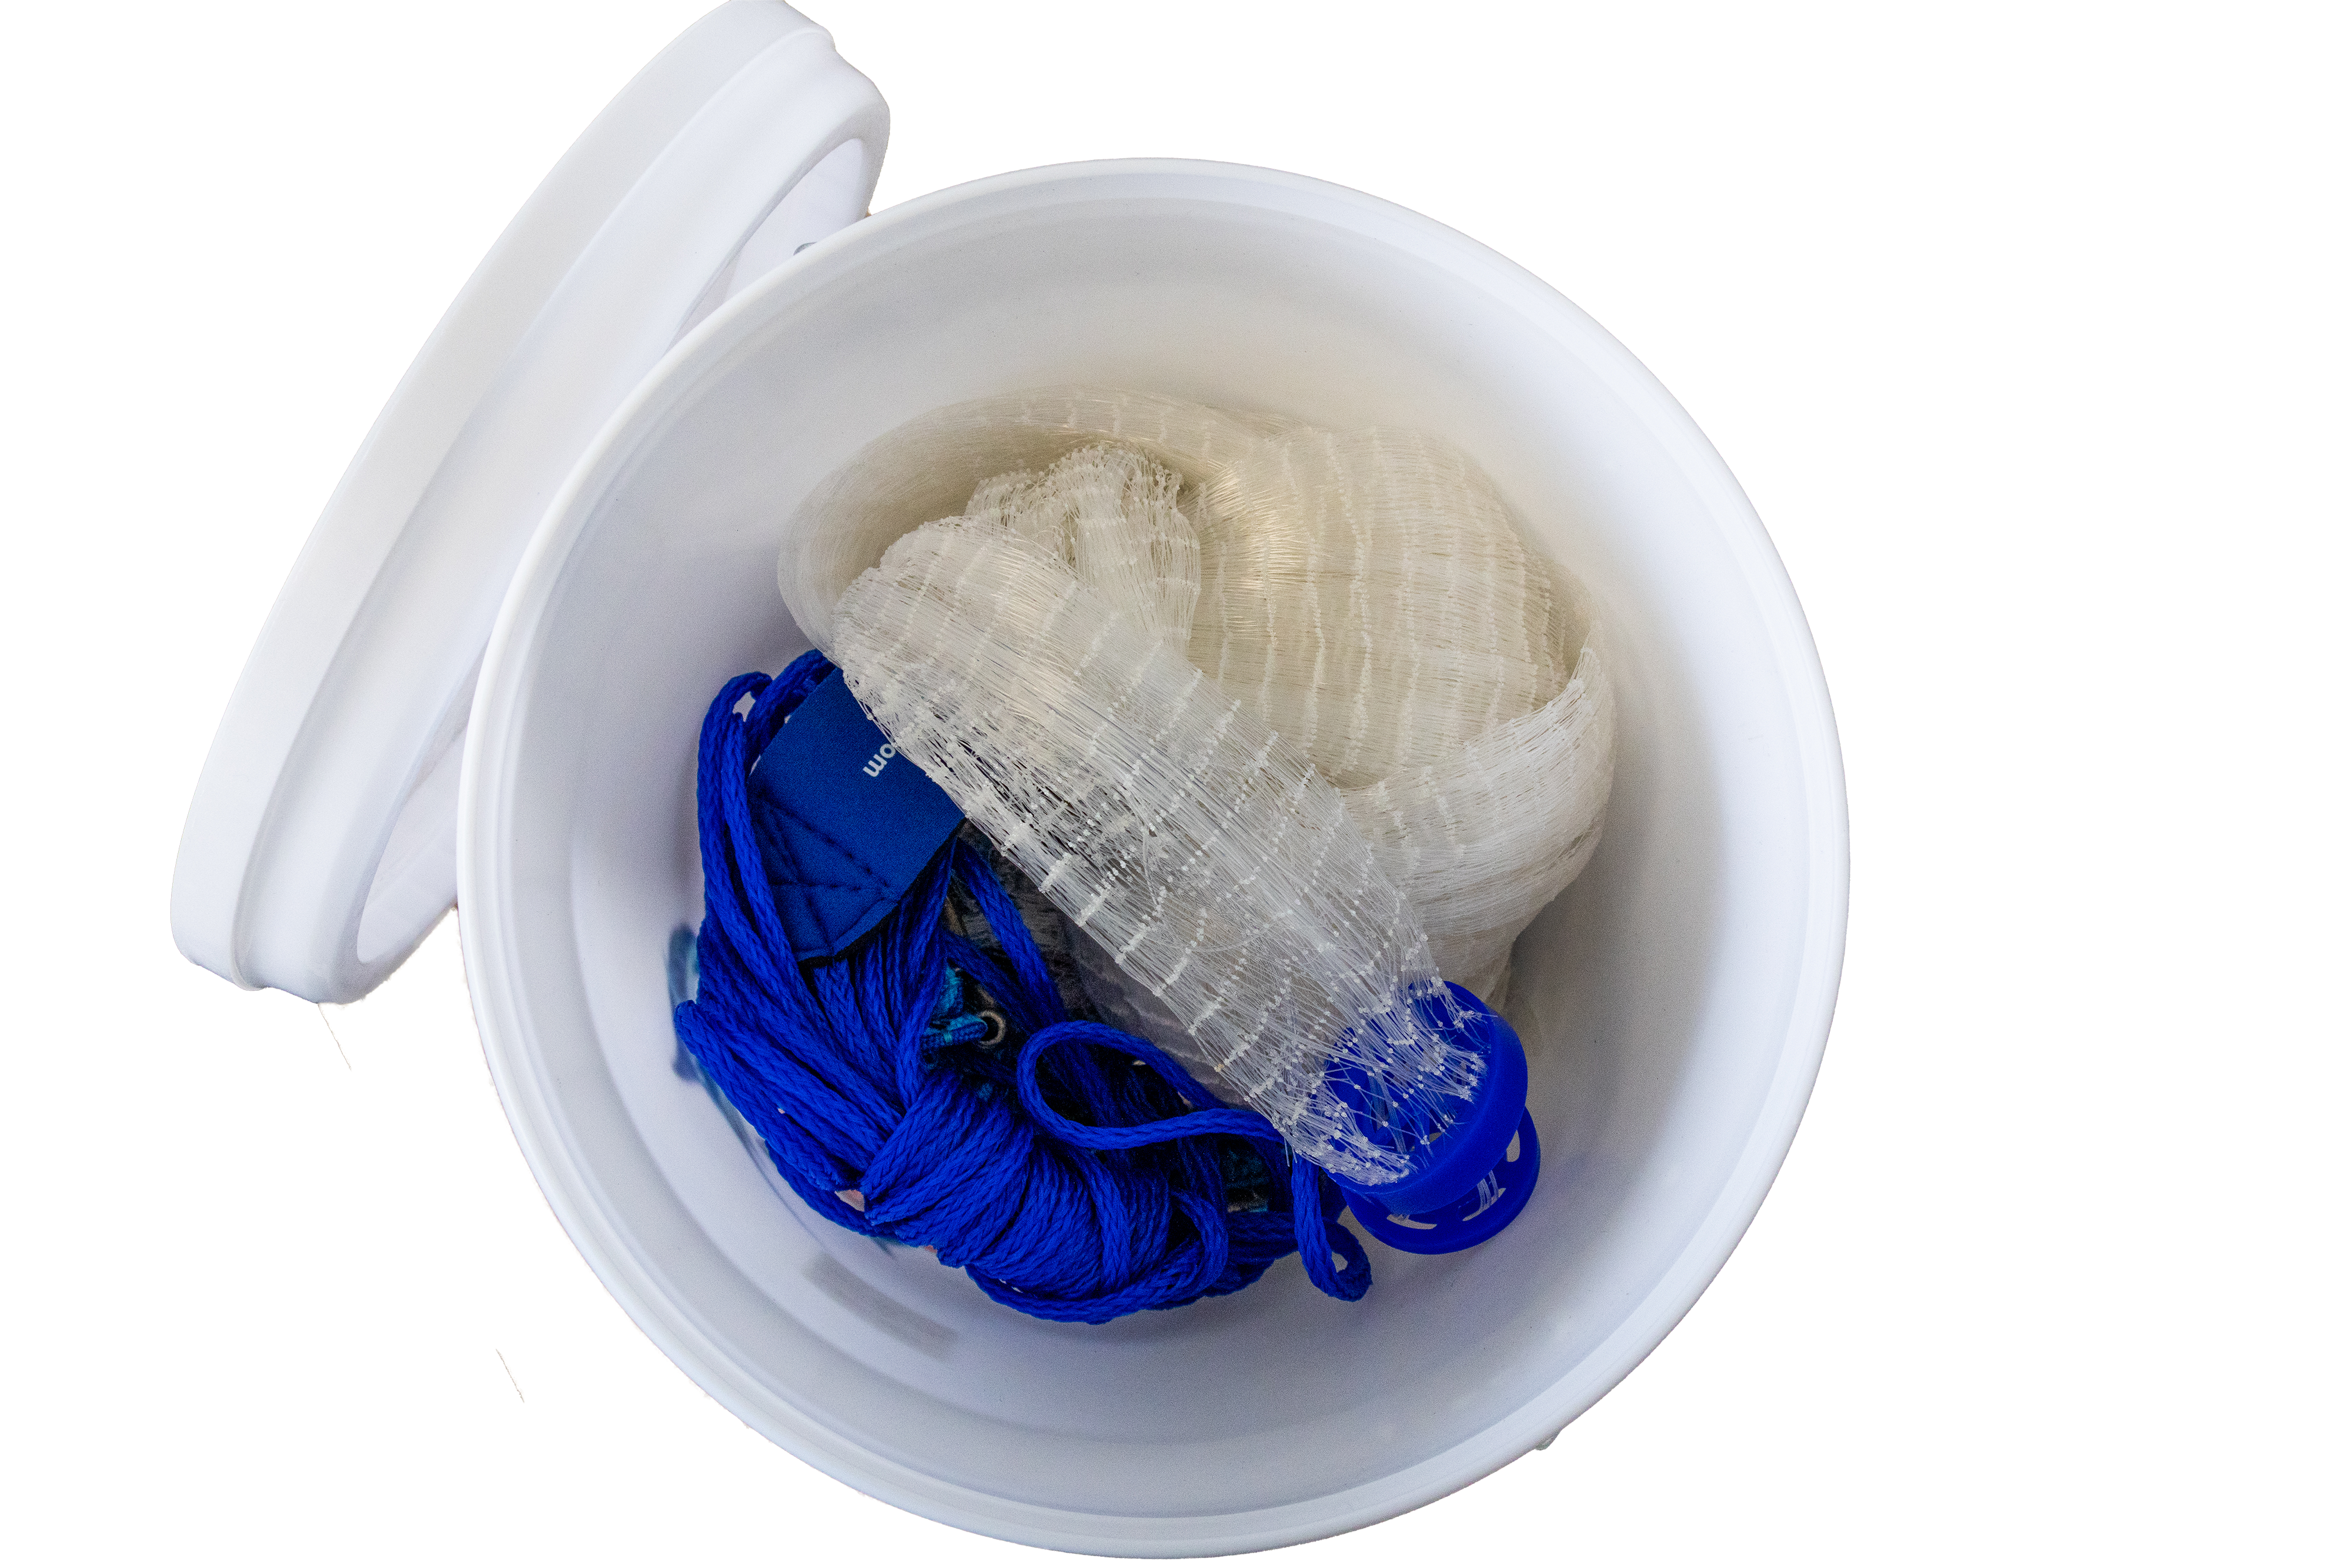 Cheap Cast Nets With Better Performance Outcomes 